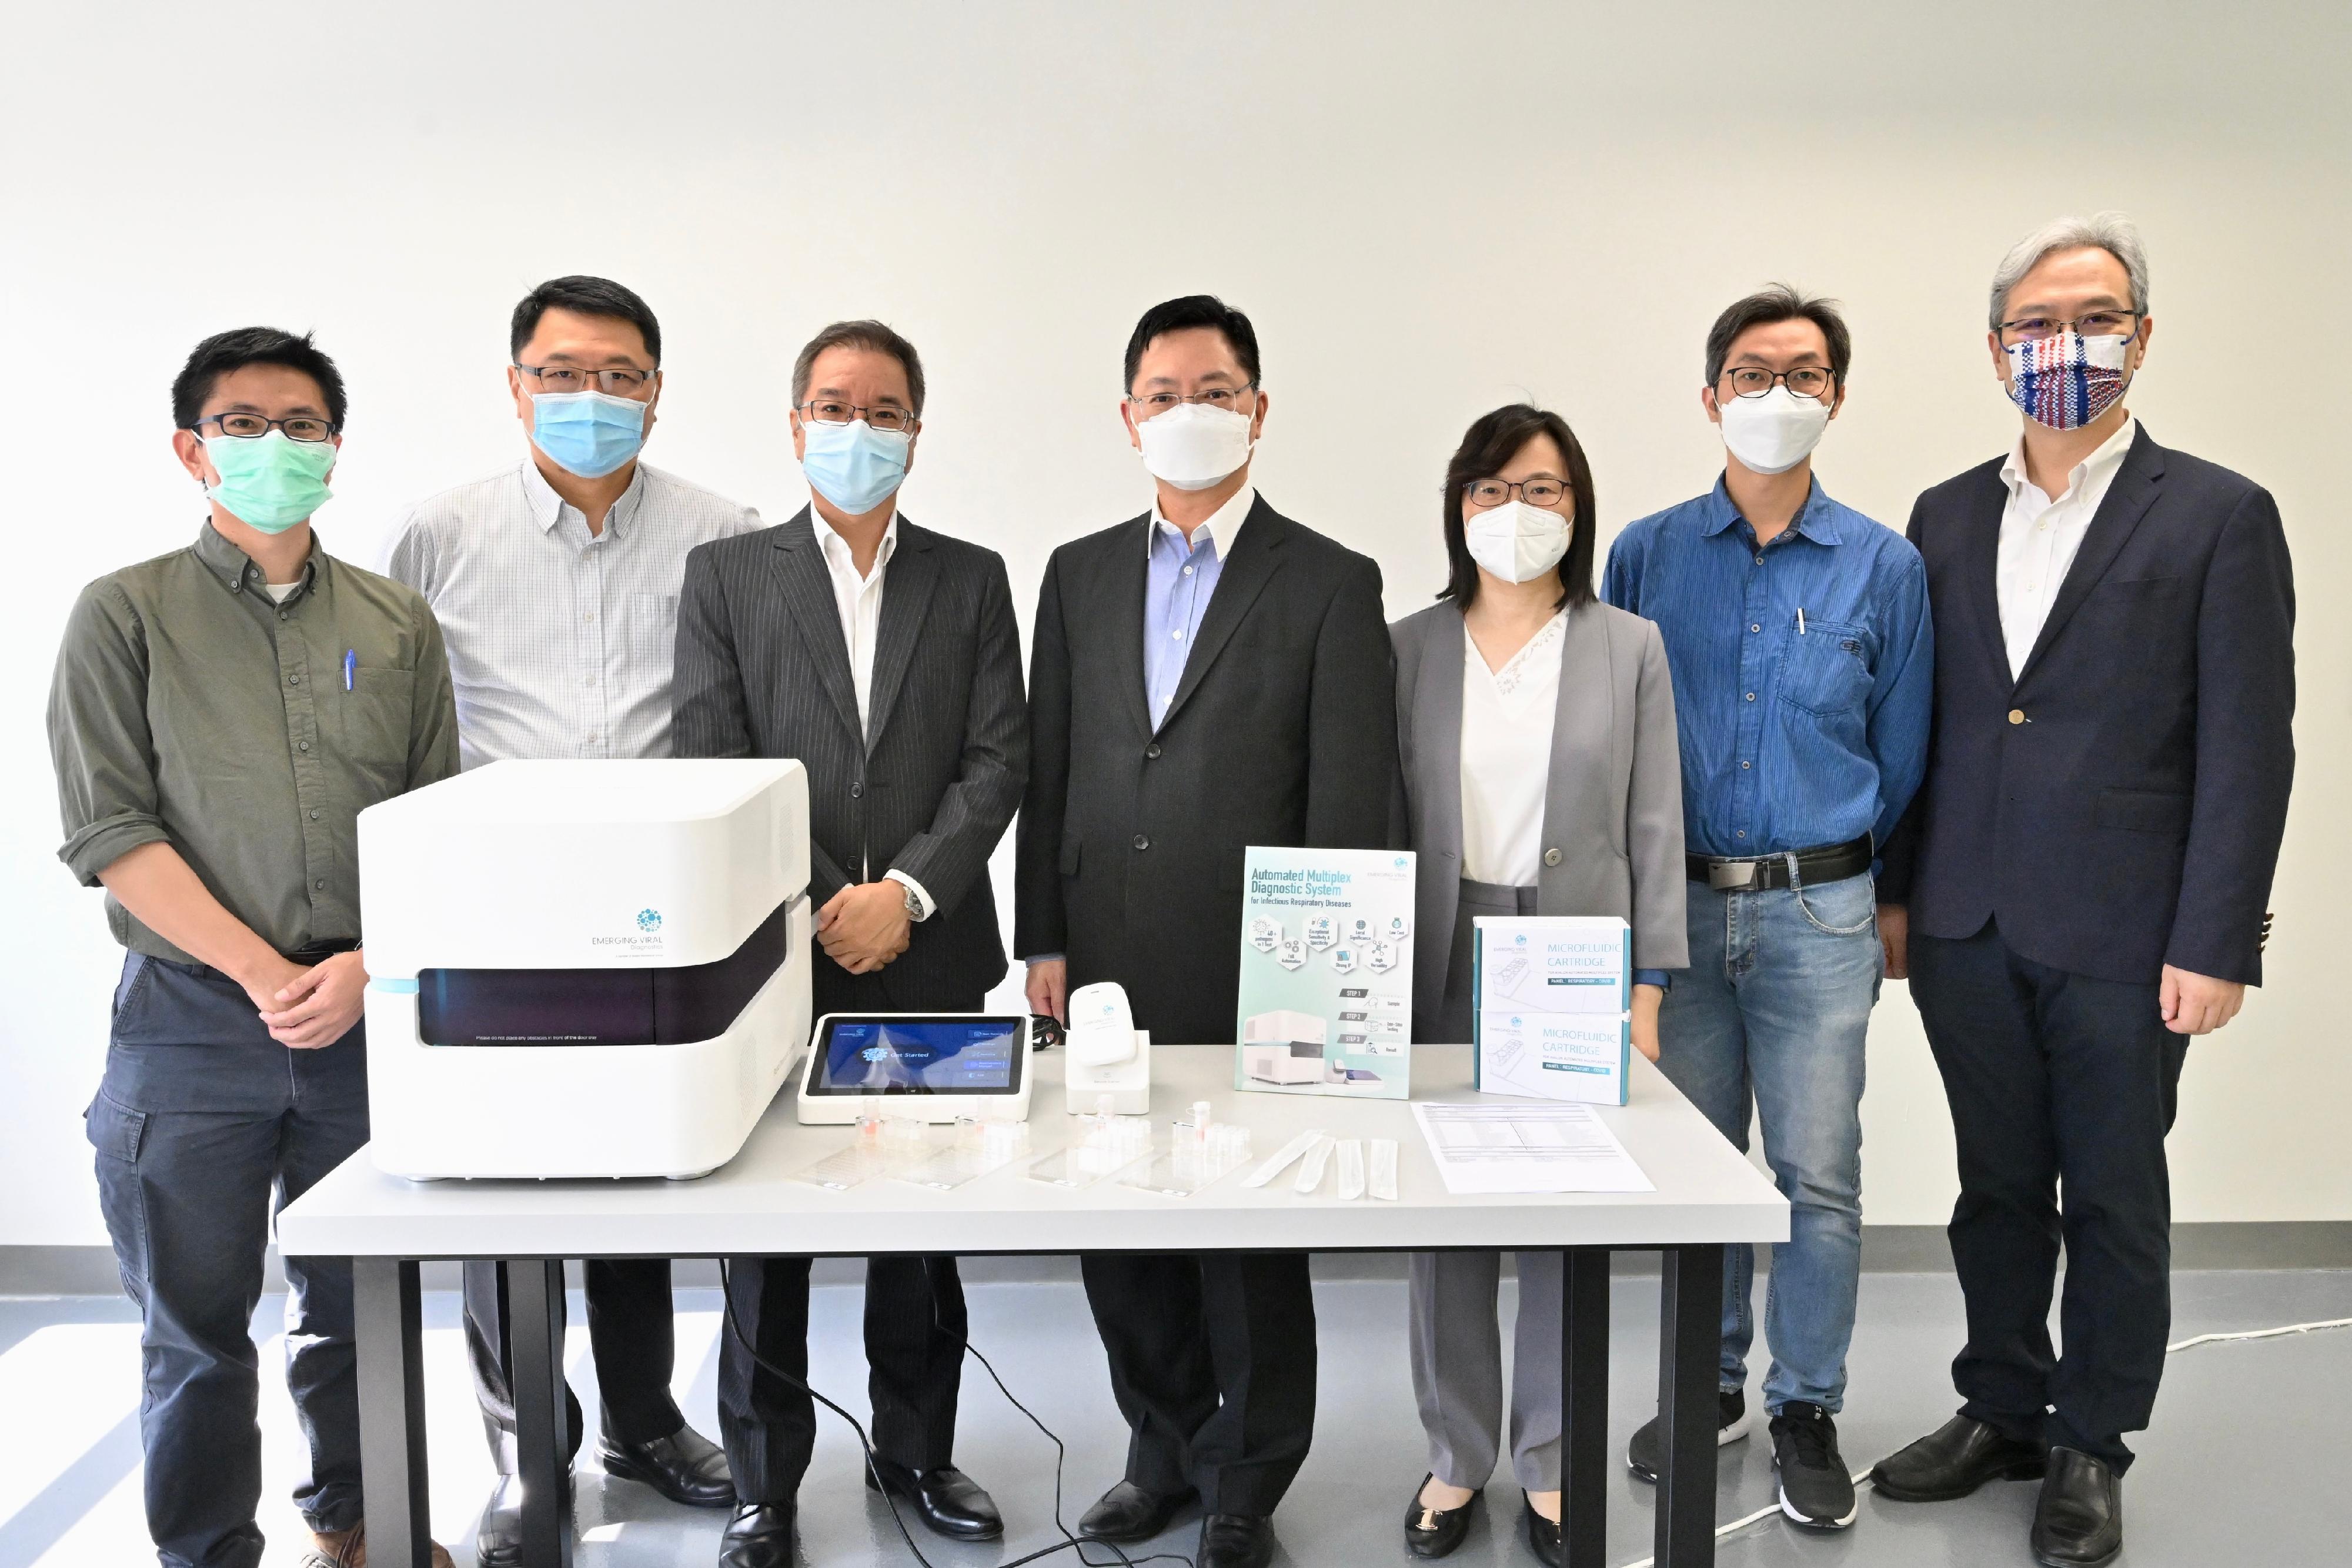 The Secretary for Innovation and Technology, Mr Alfred Sit (centre), and the Commissioner for Innovation and Technology, Ms Rebecca Pun (third right), inspect the Innovative, Automated Multiple Point-of-Care Diagnostic Systems of an enterprise located in the MARS Centre today (May 5). The System can detect the pathogens of up to 40 infectious respiratory diseases, including the COVID-19 virus and severe acute respiratory syndrome coronavirus, in a single test in around an hour. Looking on is the Chairman of the Board of Directors of the Hong Kong Science and Technology Parks Corporation, Dr Sunny Chai (second left).